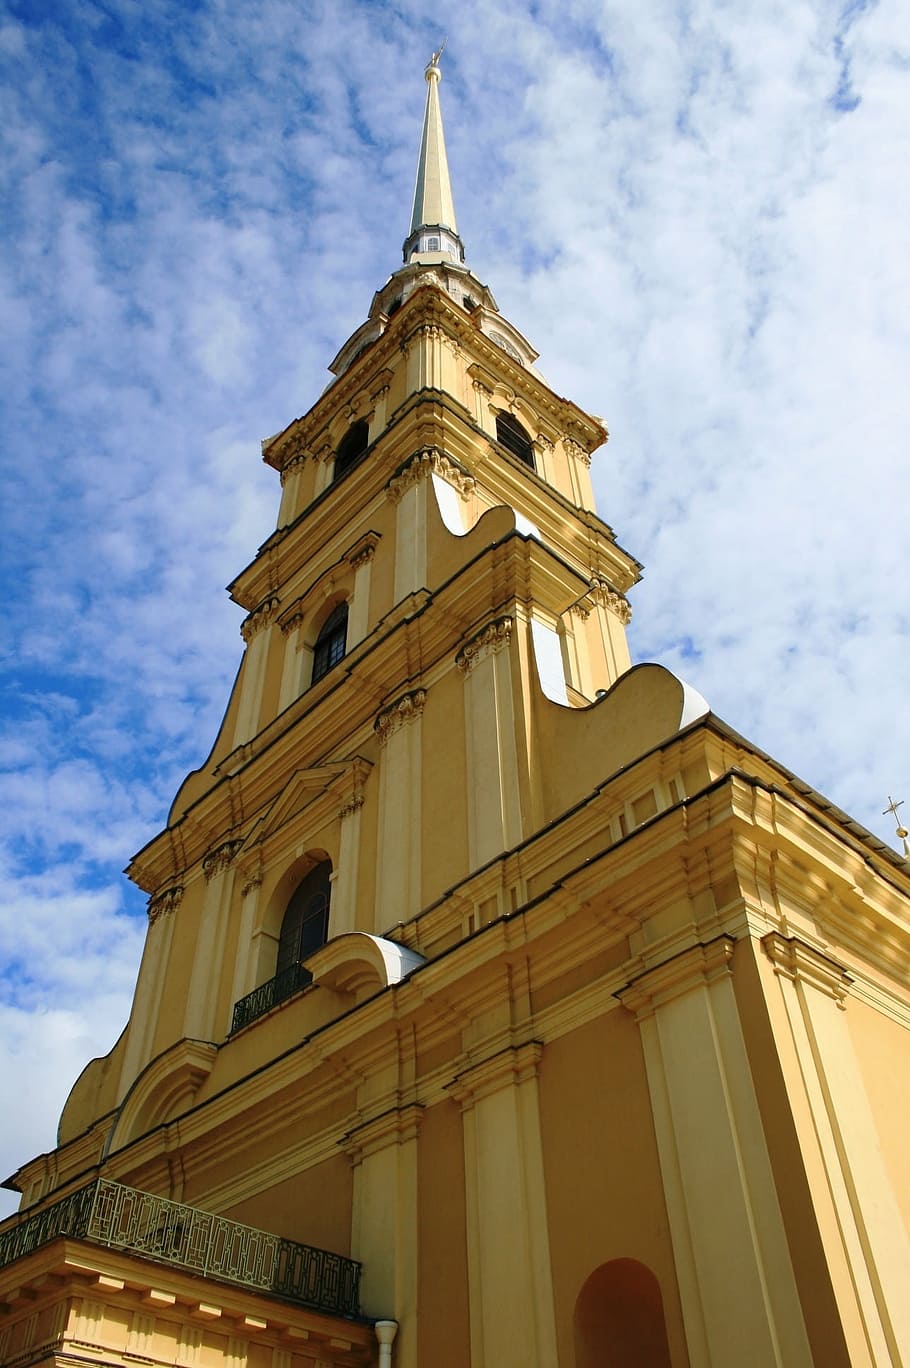 low angle photography of church, cathedral, architecture, yellow ochre building